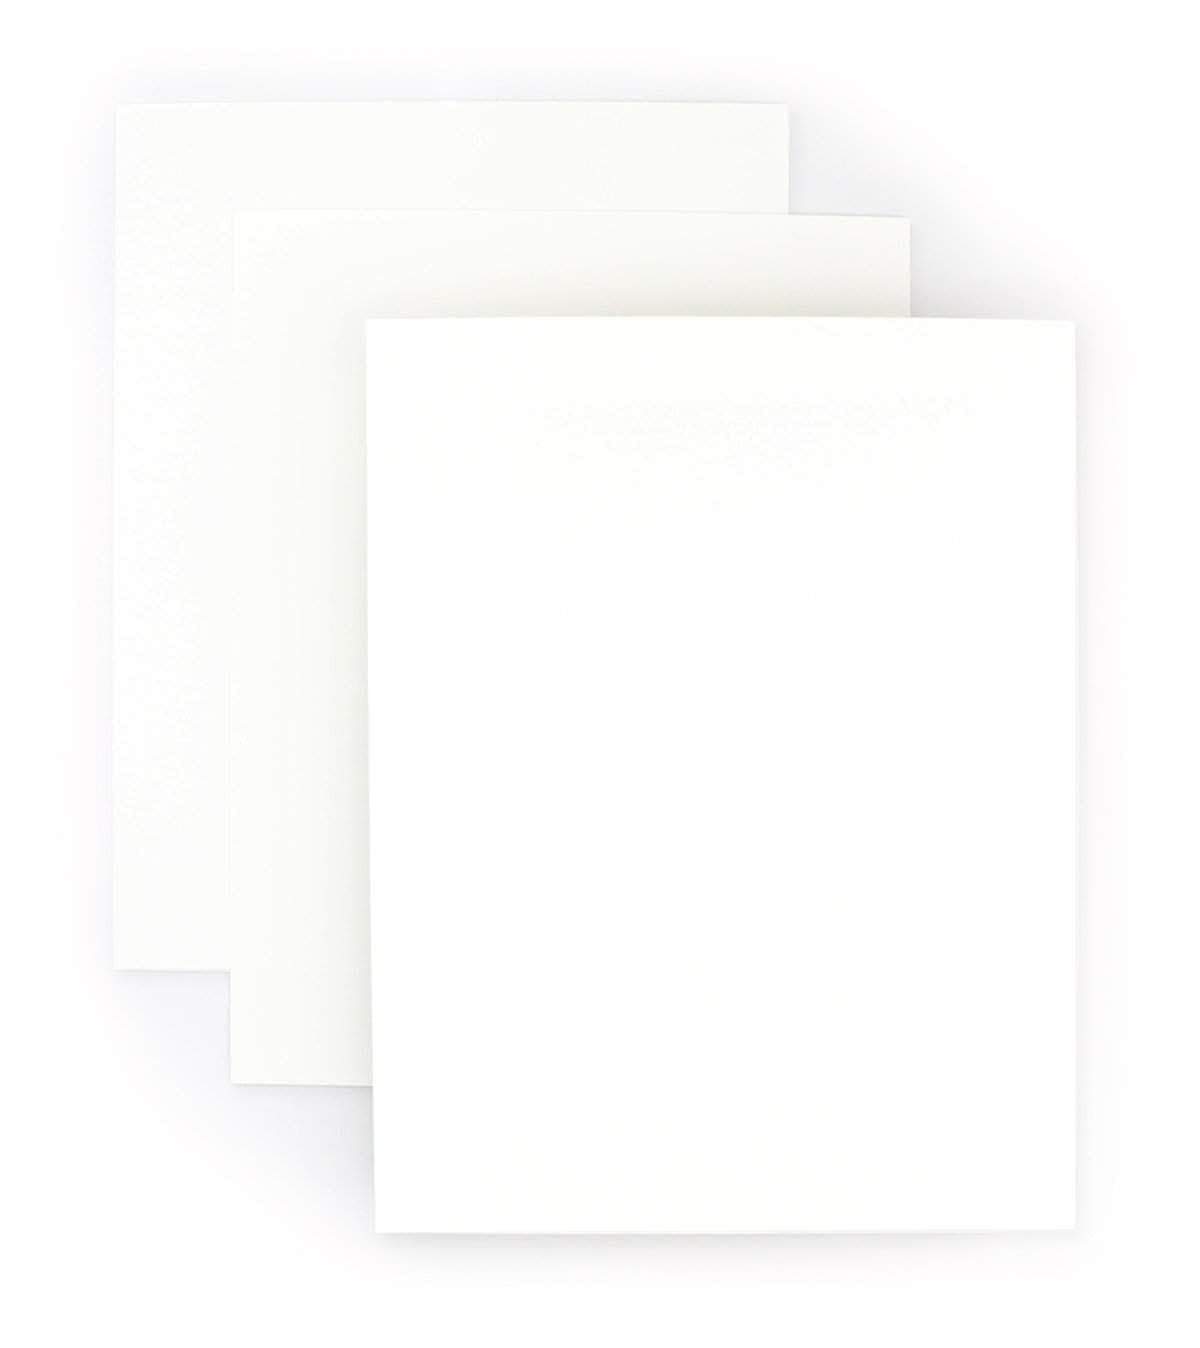 8.5 x 11 Black Card Stock Paper - 100lb Heavyweight Cover - 25 Sheets Per  Pack